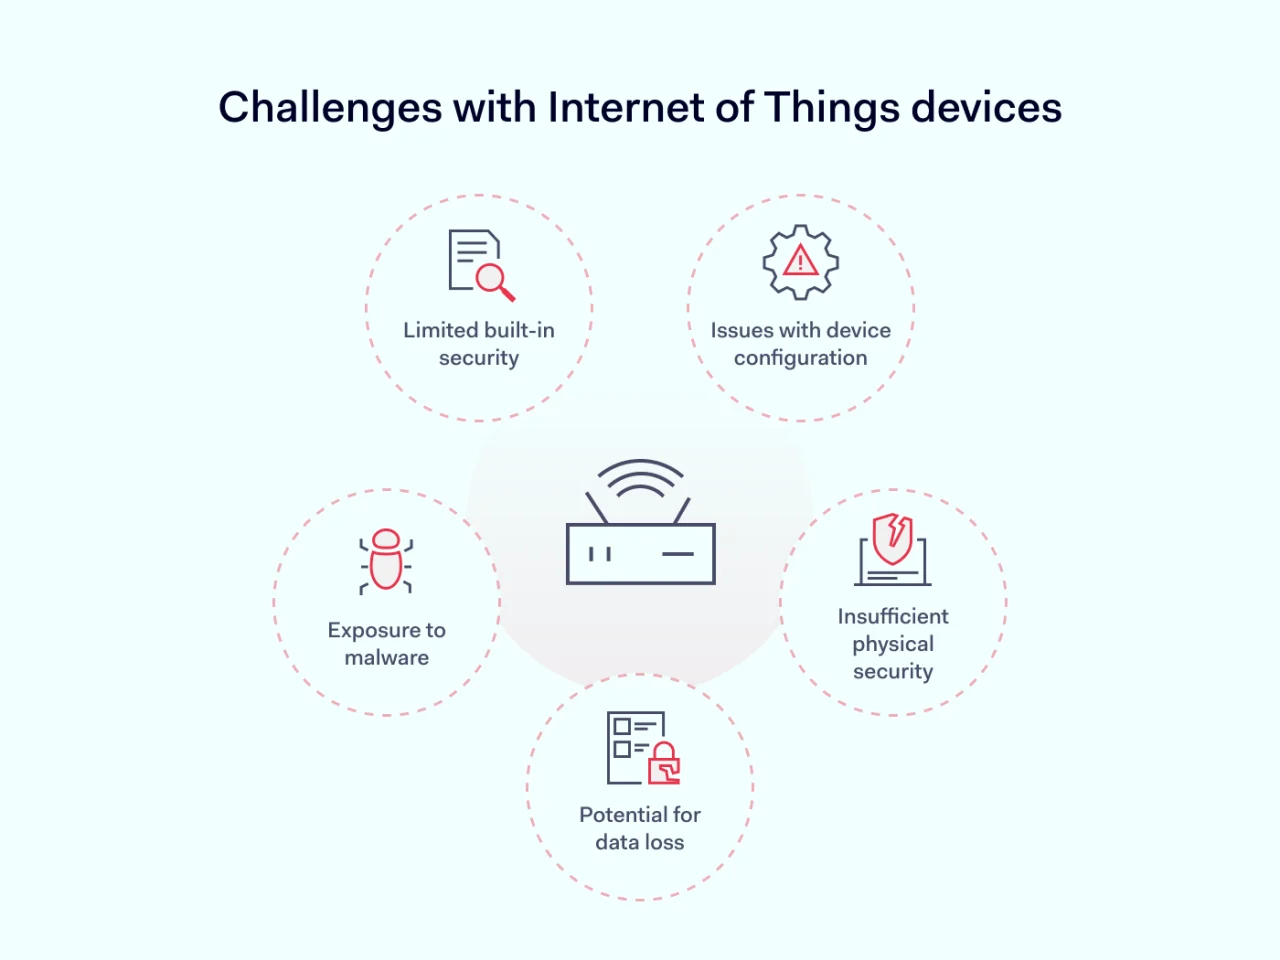 Challenges with Internet of Things devices